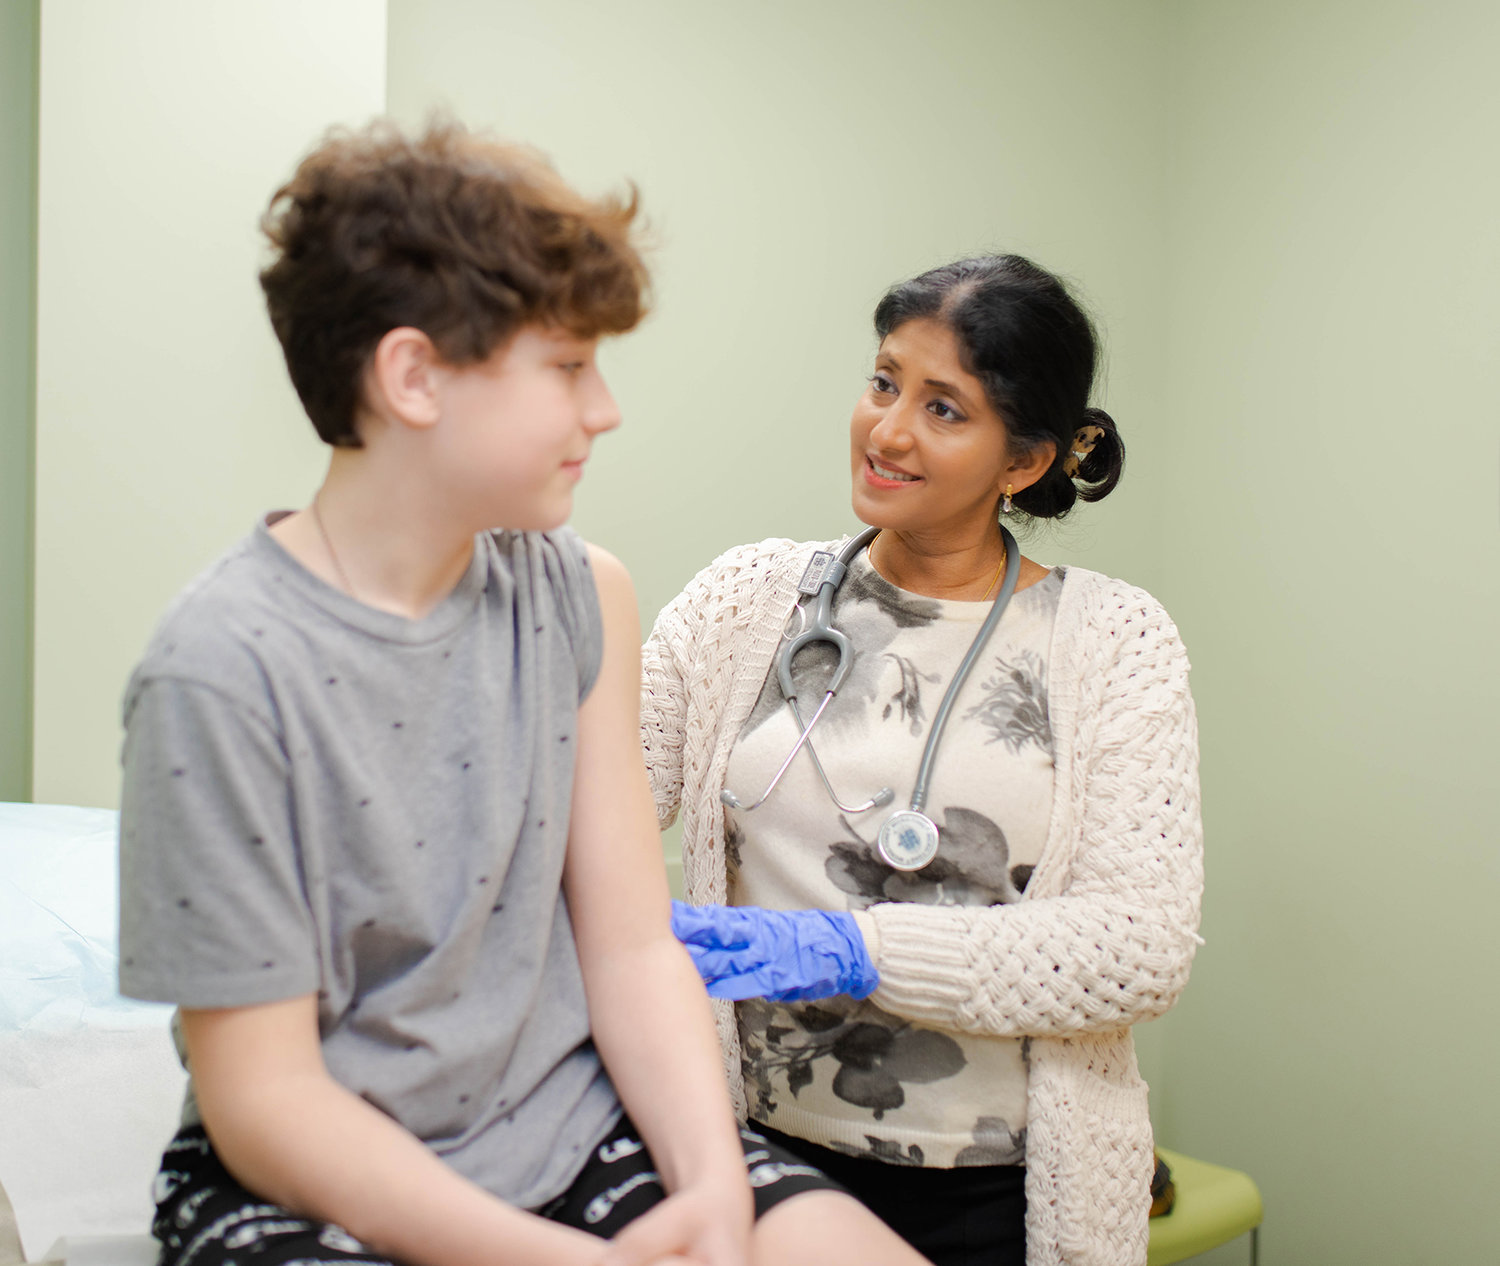 The Wright Center for Community Health provides primary and preventive care services for patients of all ages, income levels, and insurance statuses at its network of health care clinics in Northeast Pennsylvania. Dr. Manju Mary Thomas, a pediatrician, provides a well-visit checkup for a pediatric patient at the Mid Valley Practice in Jermyn, PA.